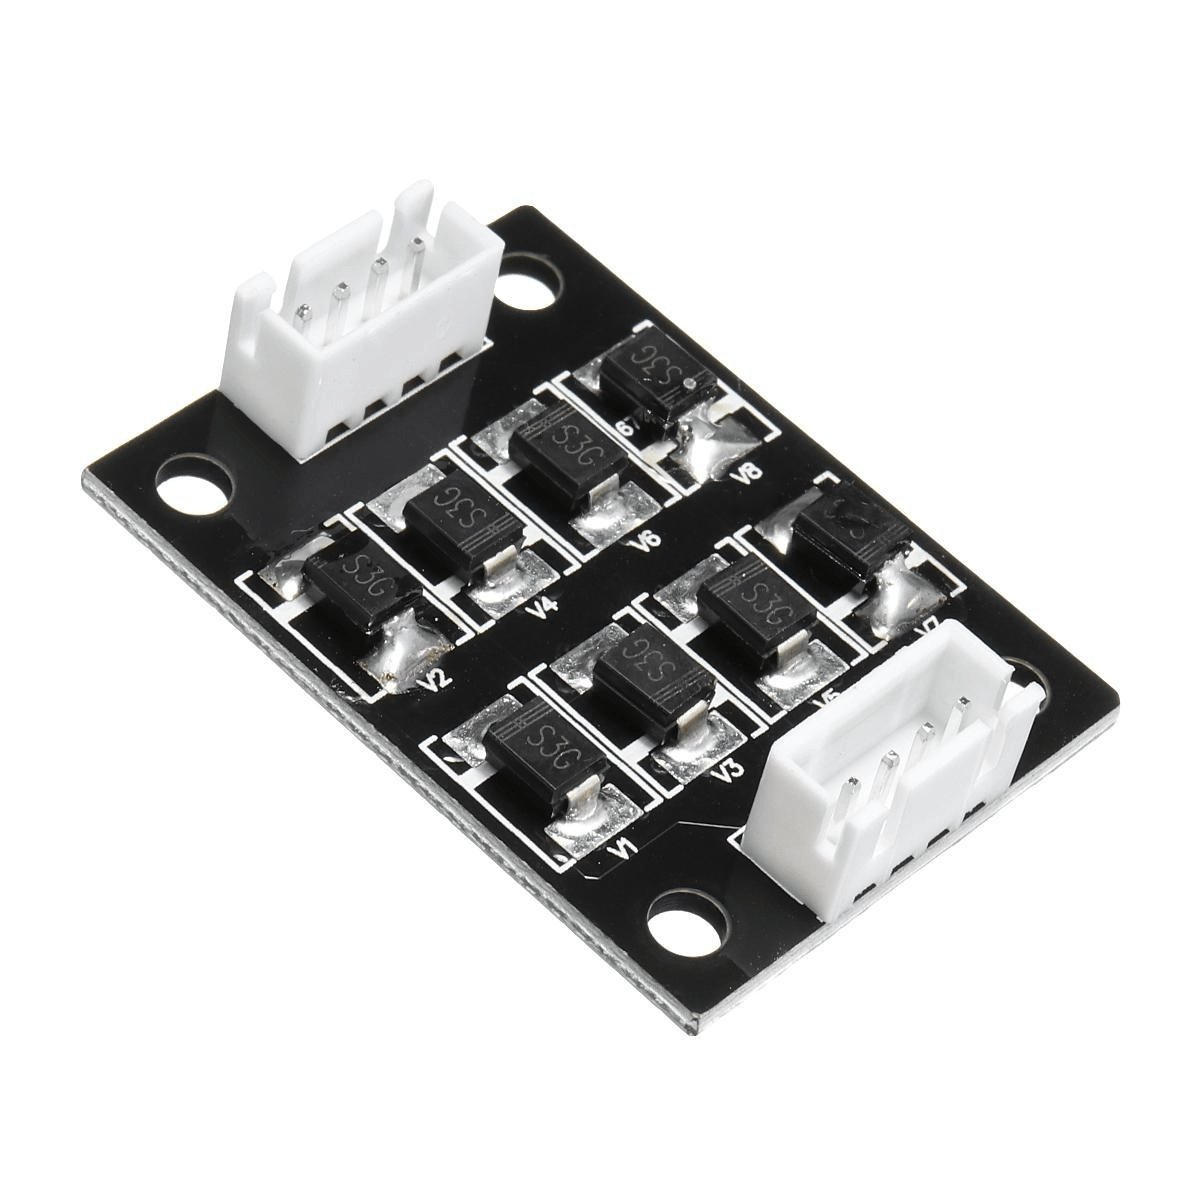 TL-Smoother Addon Module With Dupont Line For 3D Printer Stepper Motor